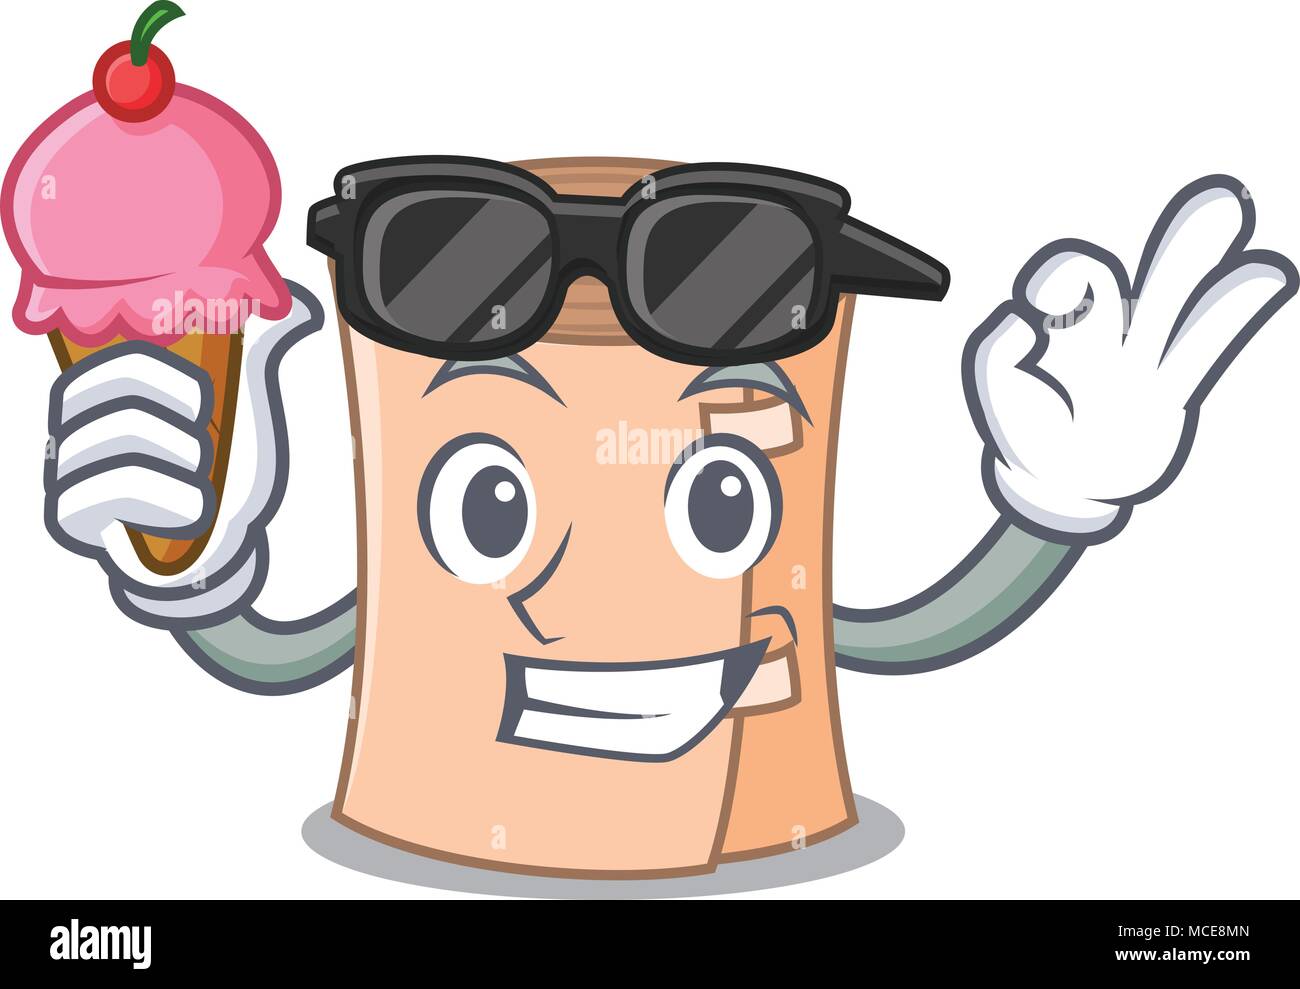 With ice cream cool medical gauze character cartoon vector illustration Stock Vector